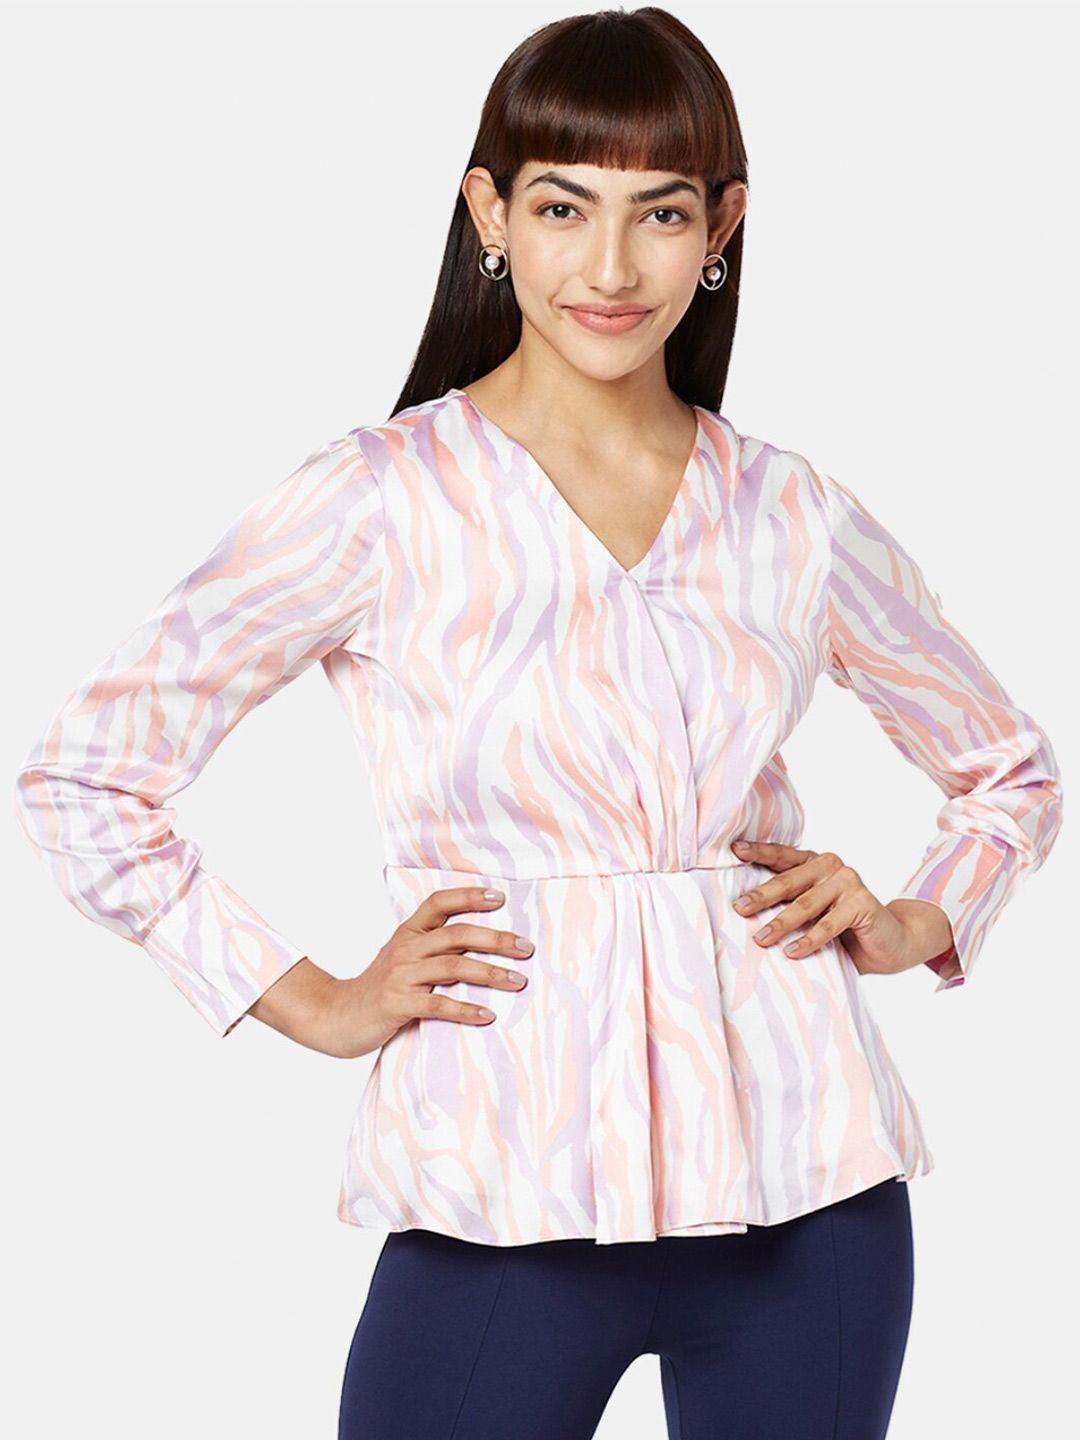 annabelle by pantaloons abstract printed empire top